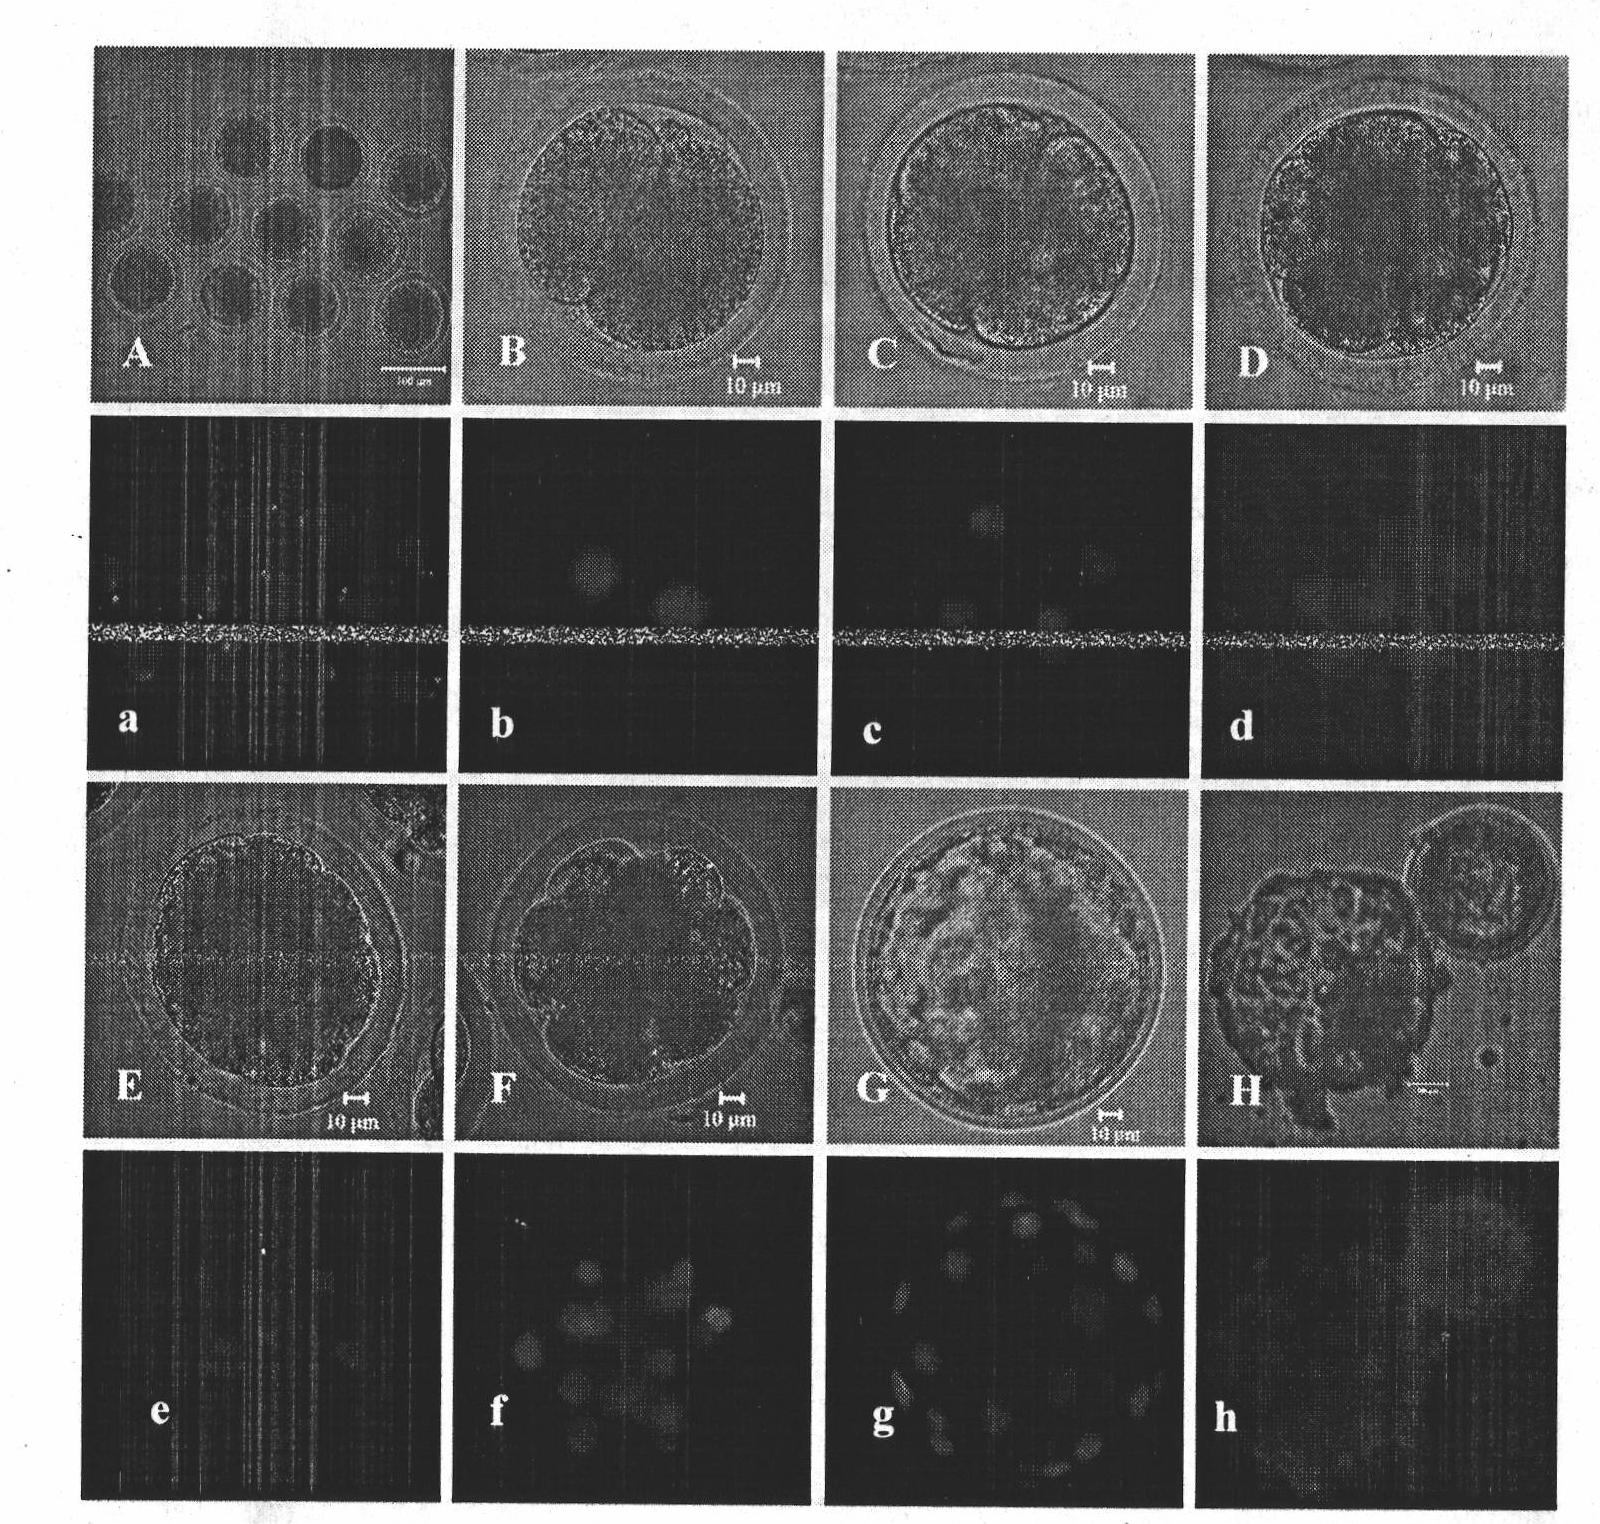 Simple in-vitro maturation culture method for oocytes